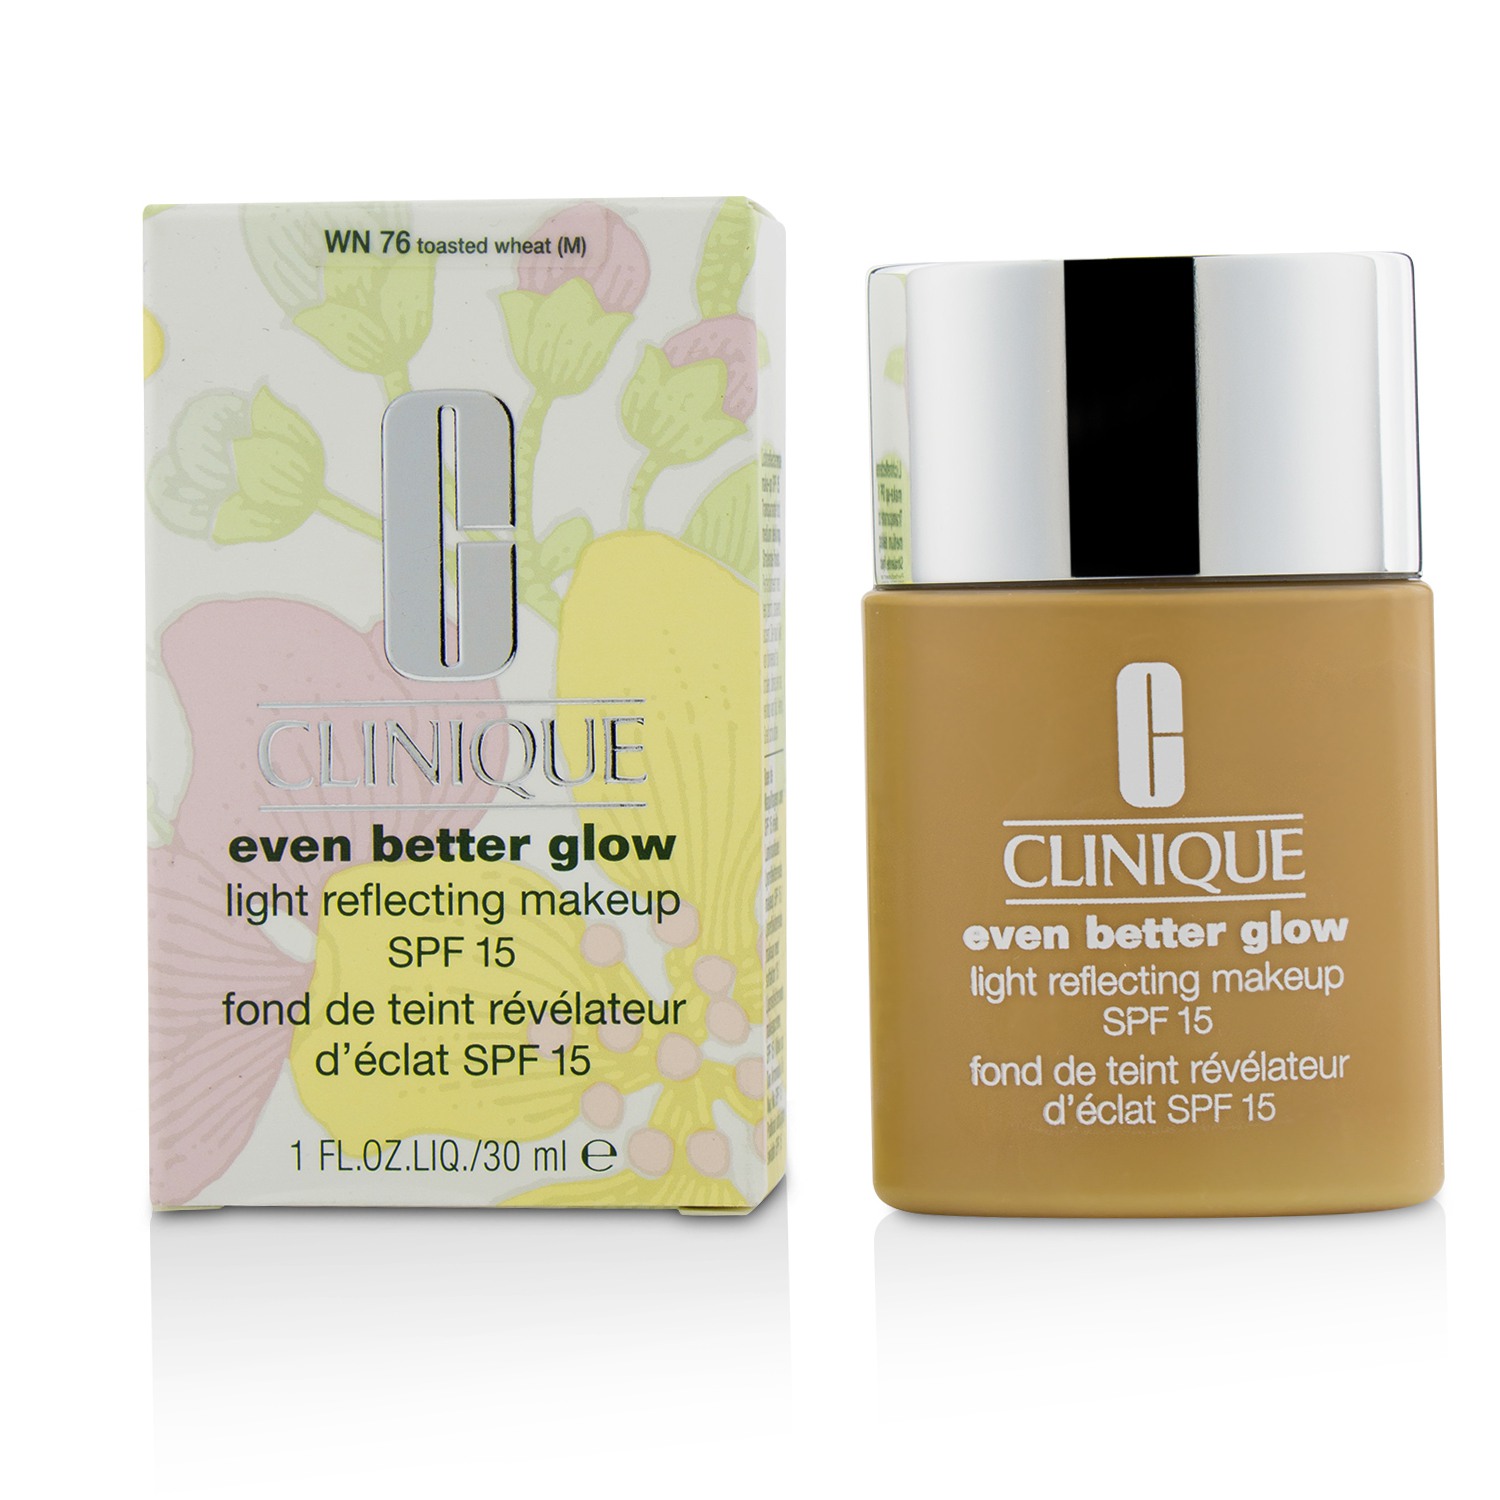 Even Better Glow Light Reflecting Makeup SPF 15 - # WN 76 Toasted Wheat Clinique Image